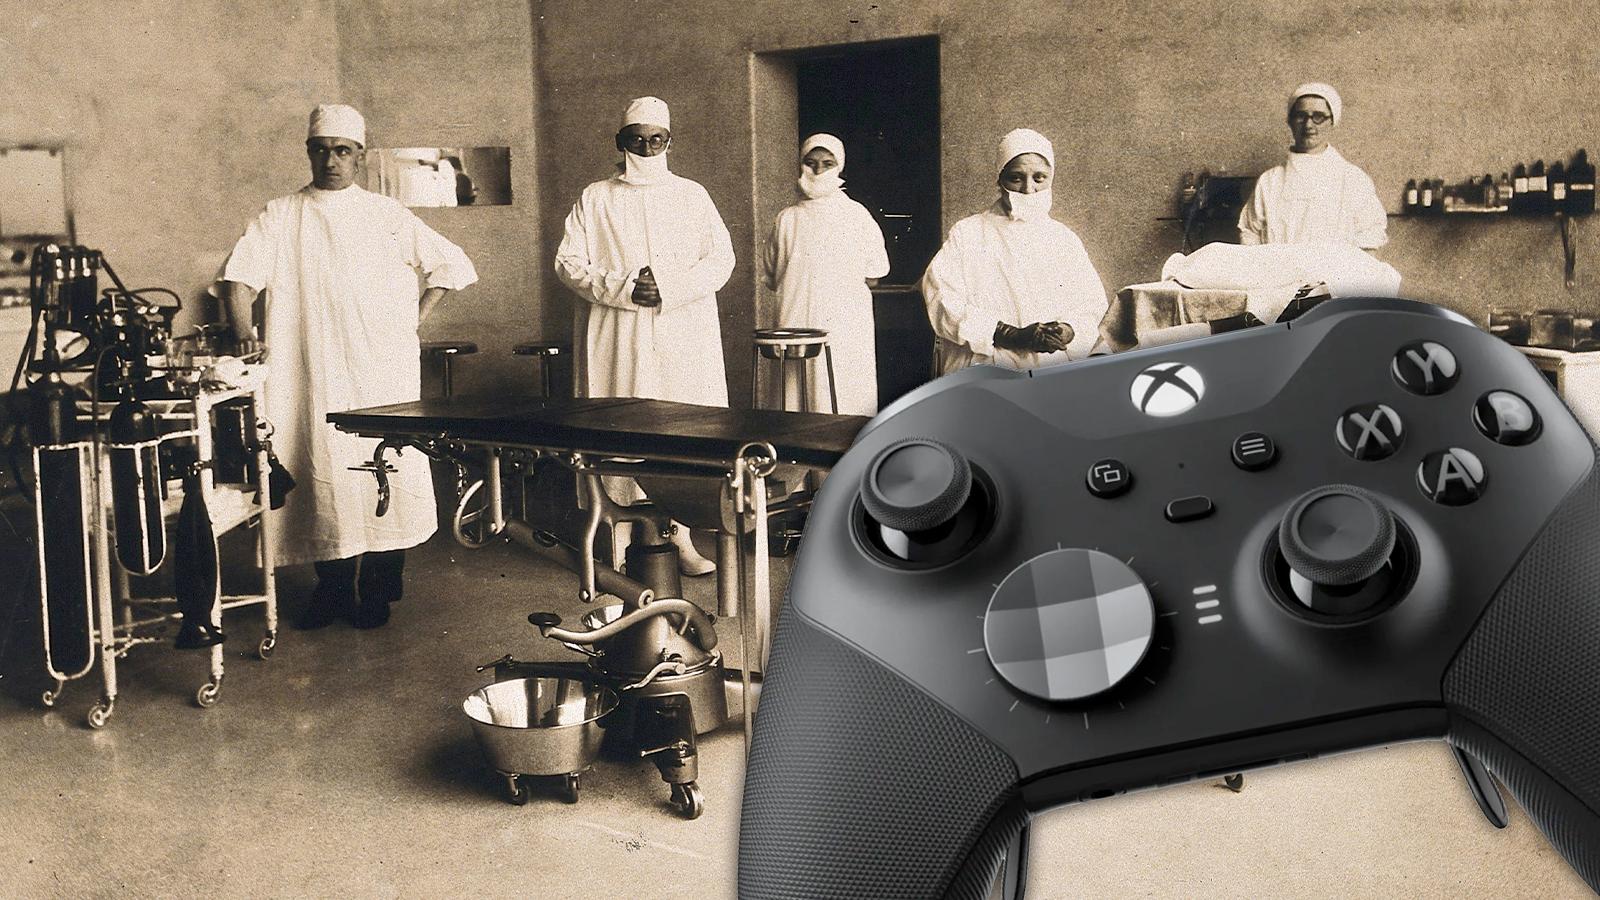 A historical photo of a surgery room with an xbox controller in front of it